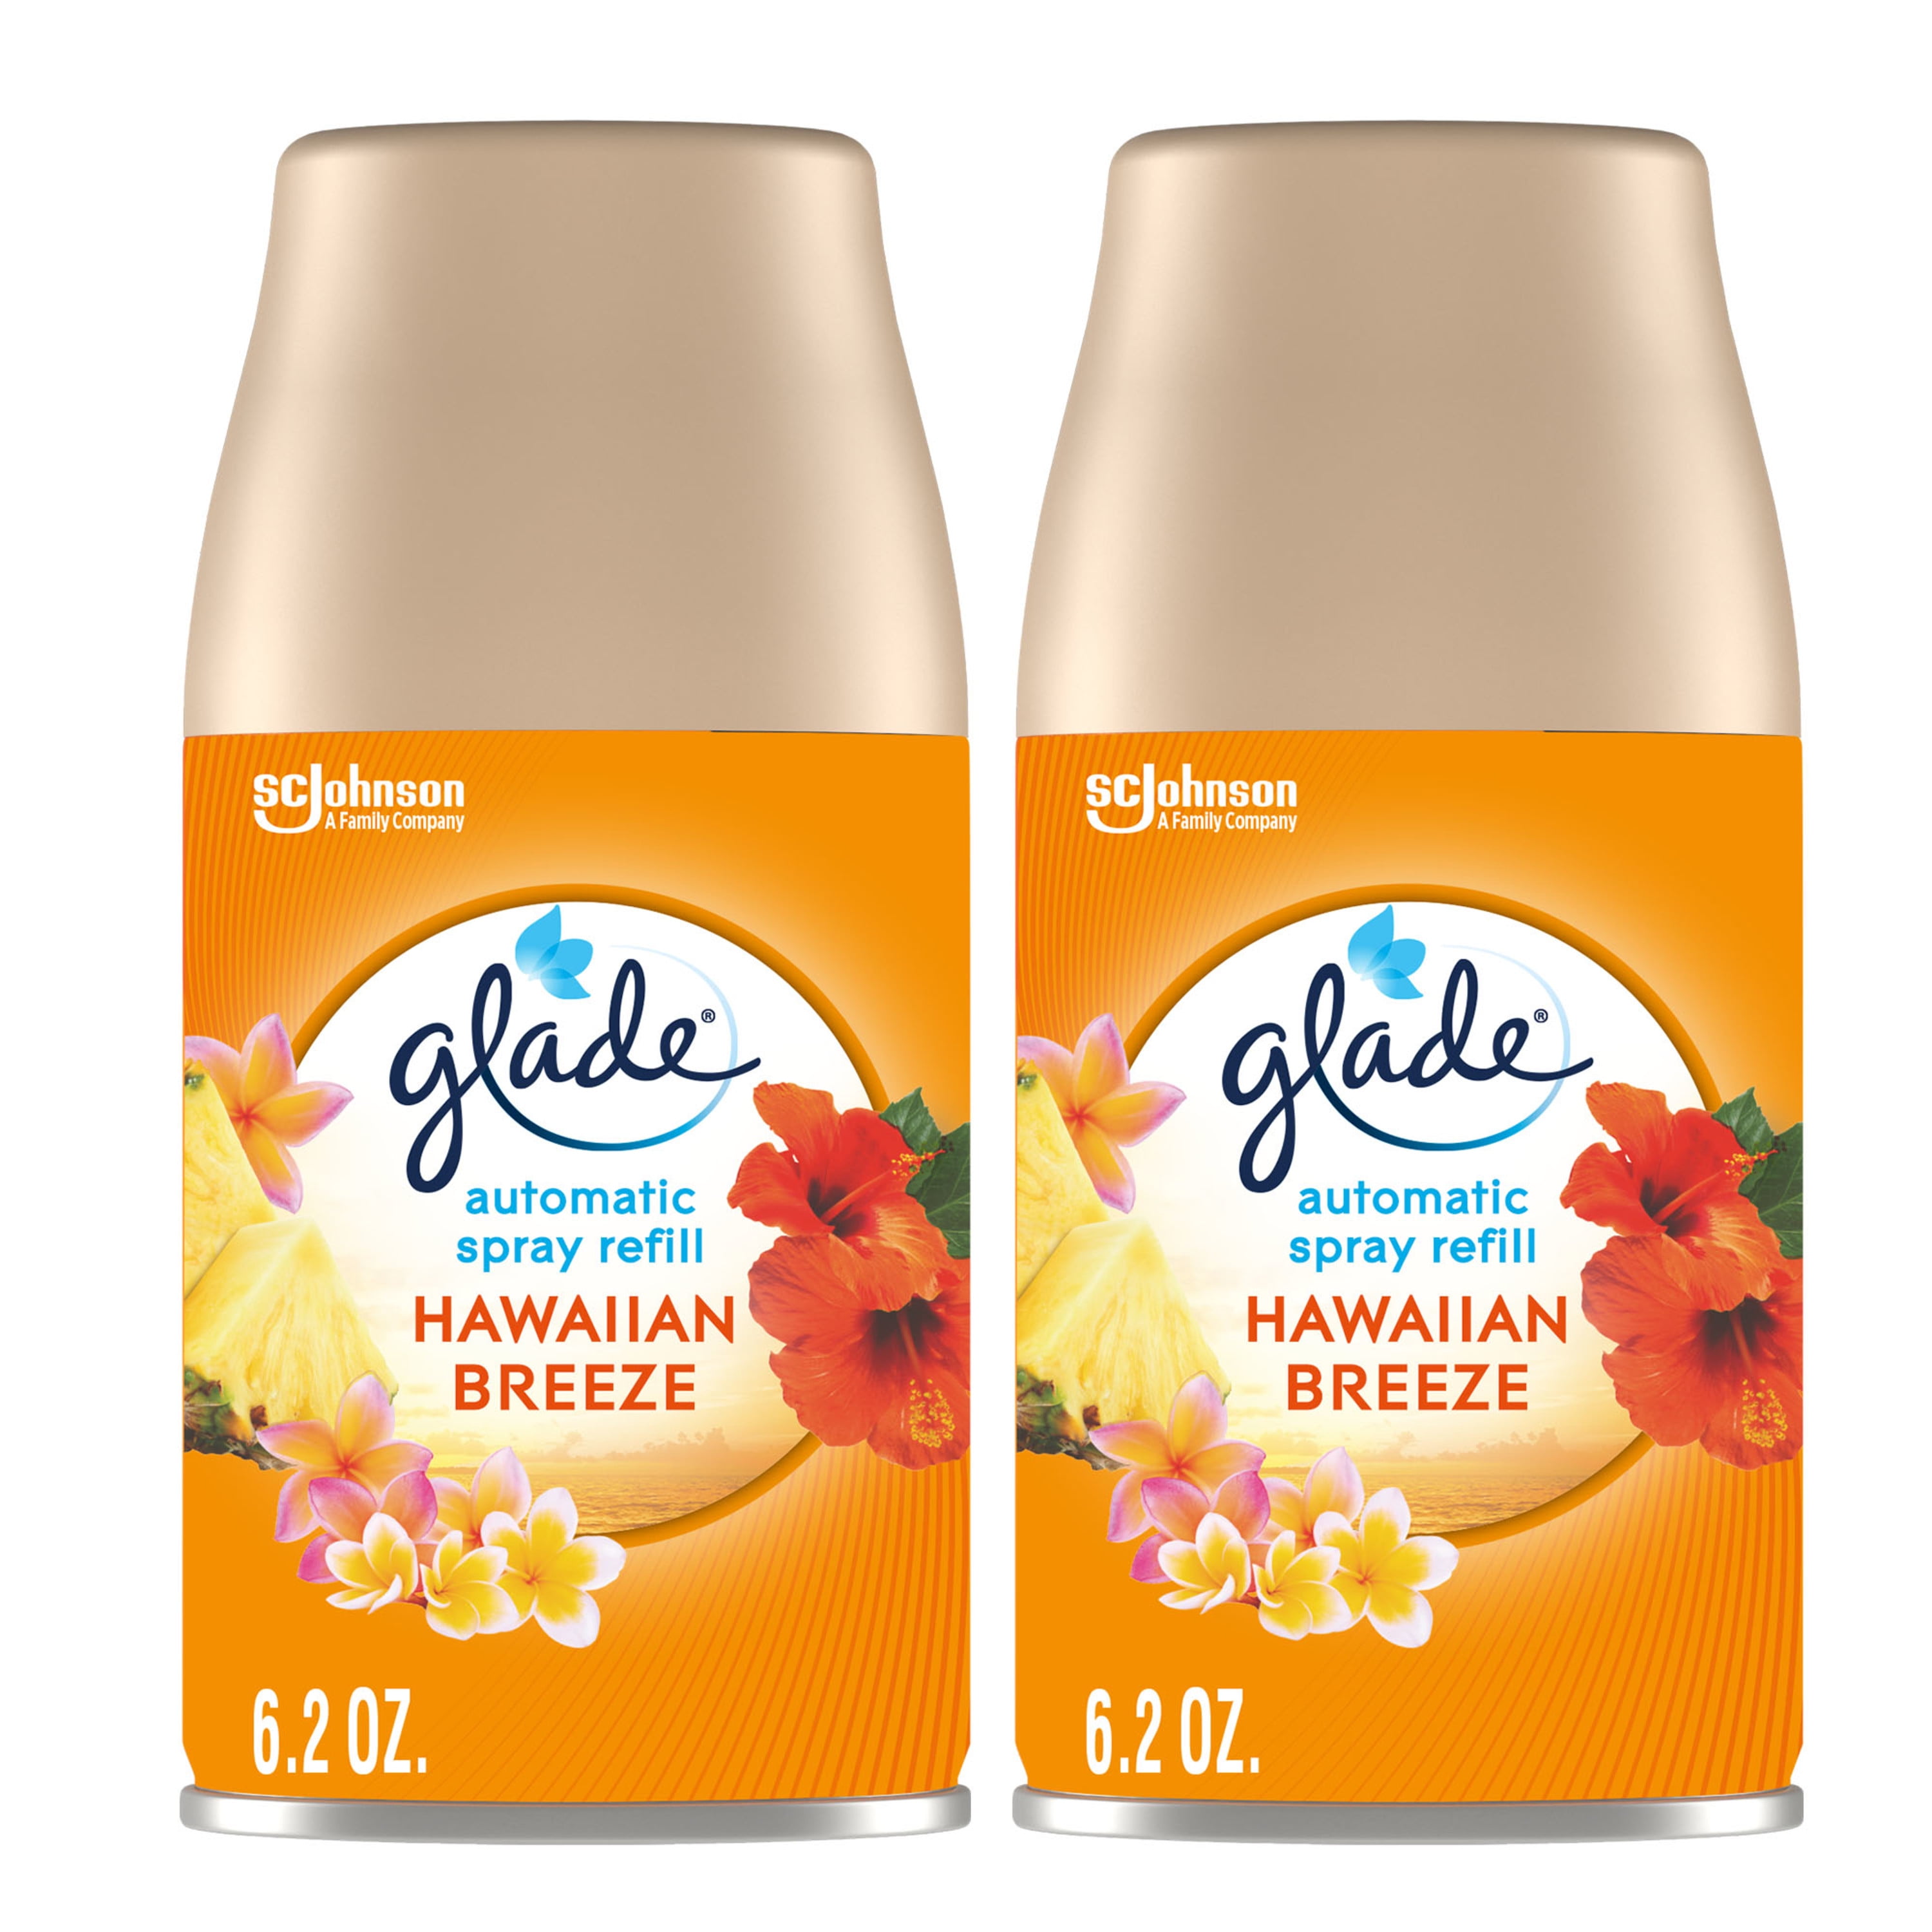 Glade® PlugIns® Fall Night Long Scented Oil Refills, 2 ct / 0.67